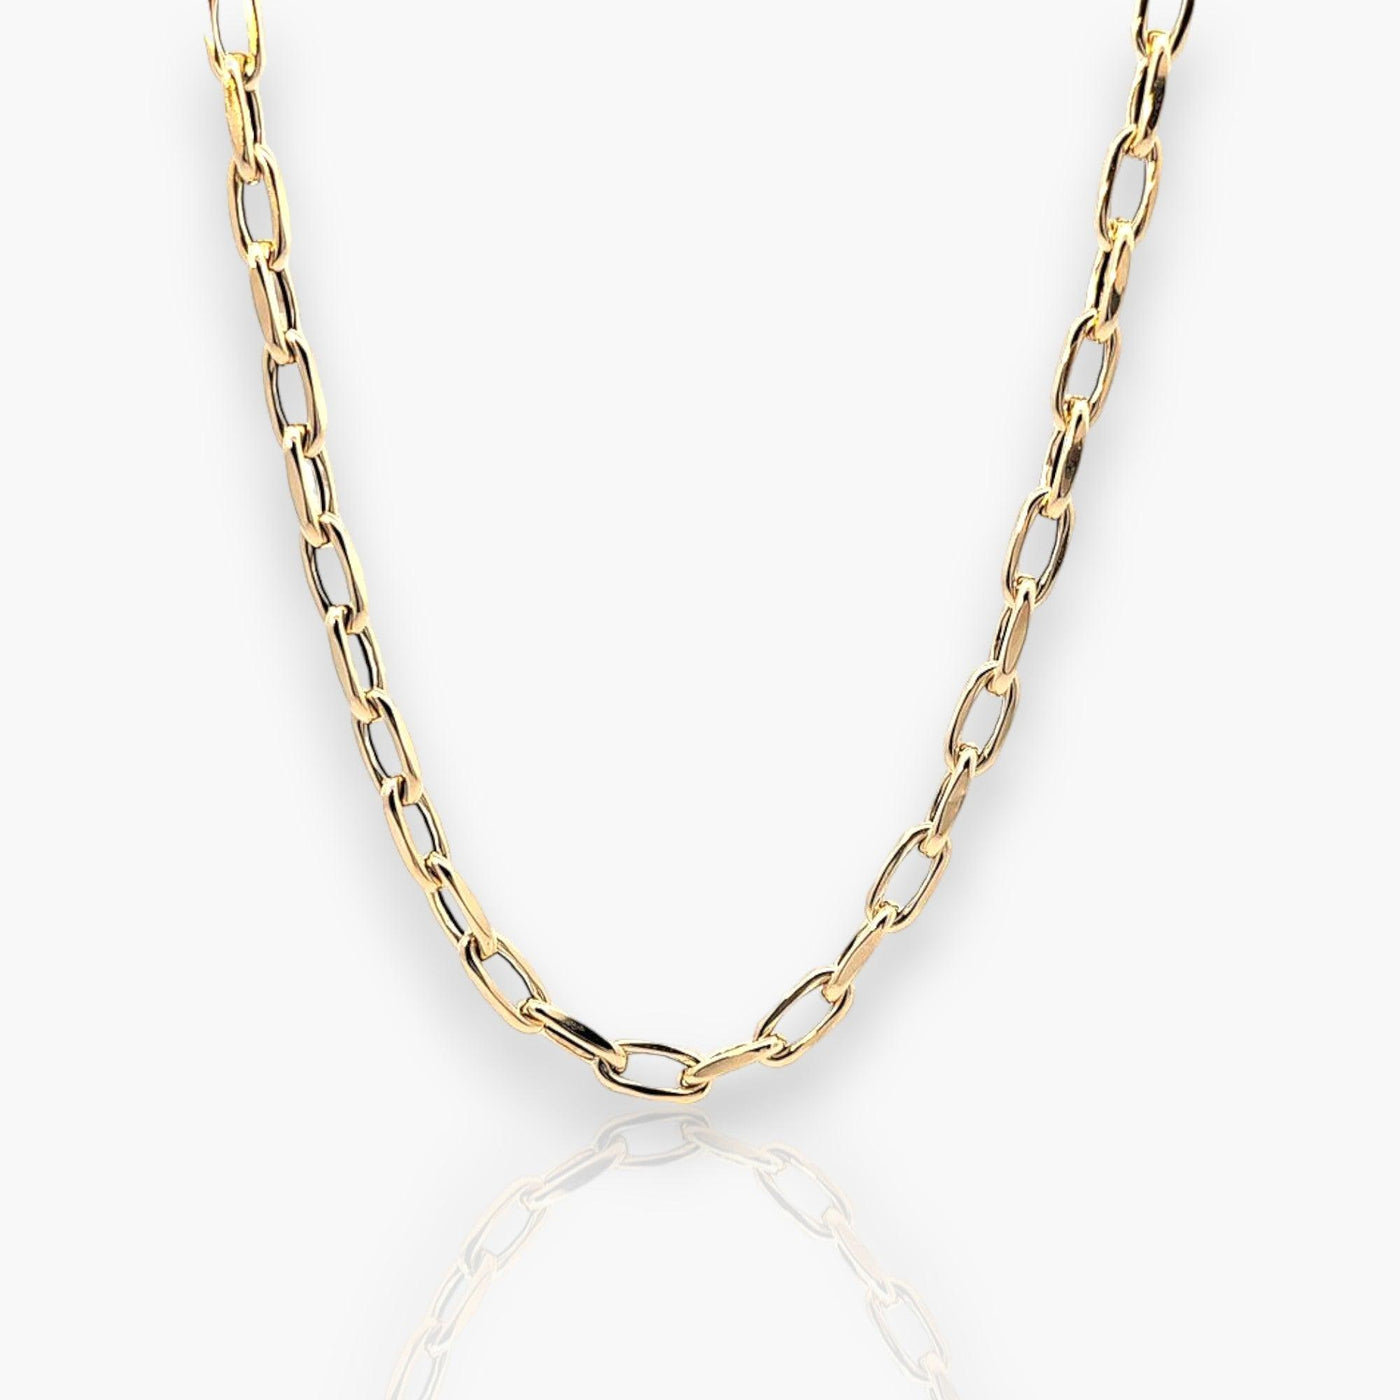 18K Yellow Gold Chain Necklace - Moregola Fine Jewelry